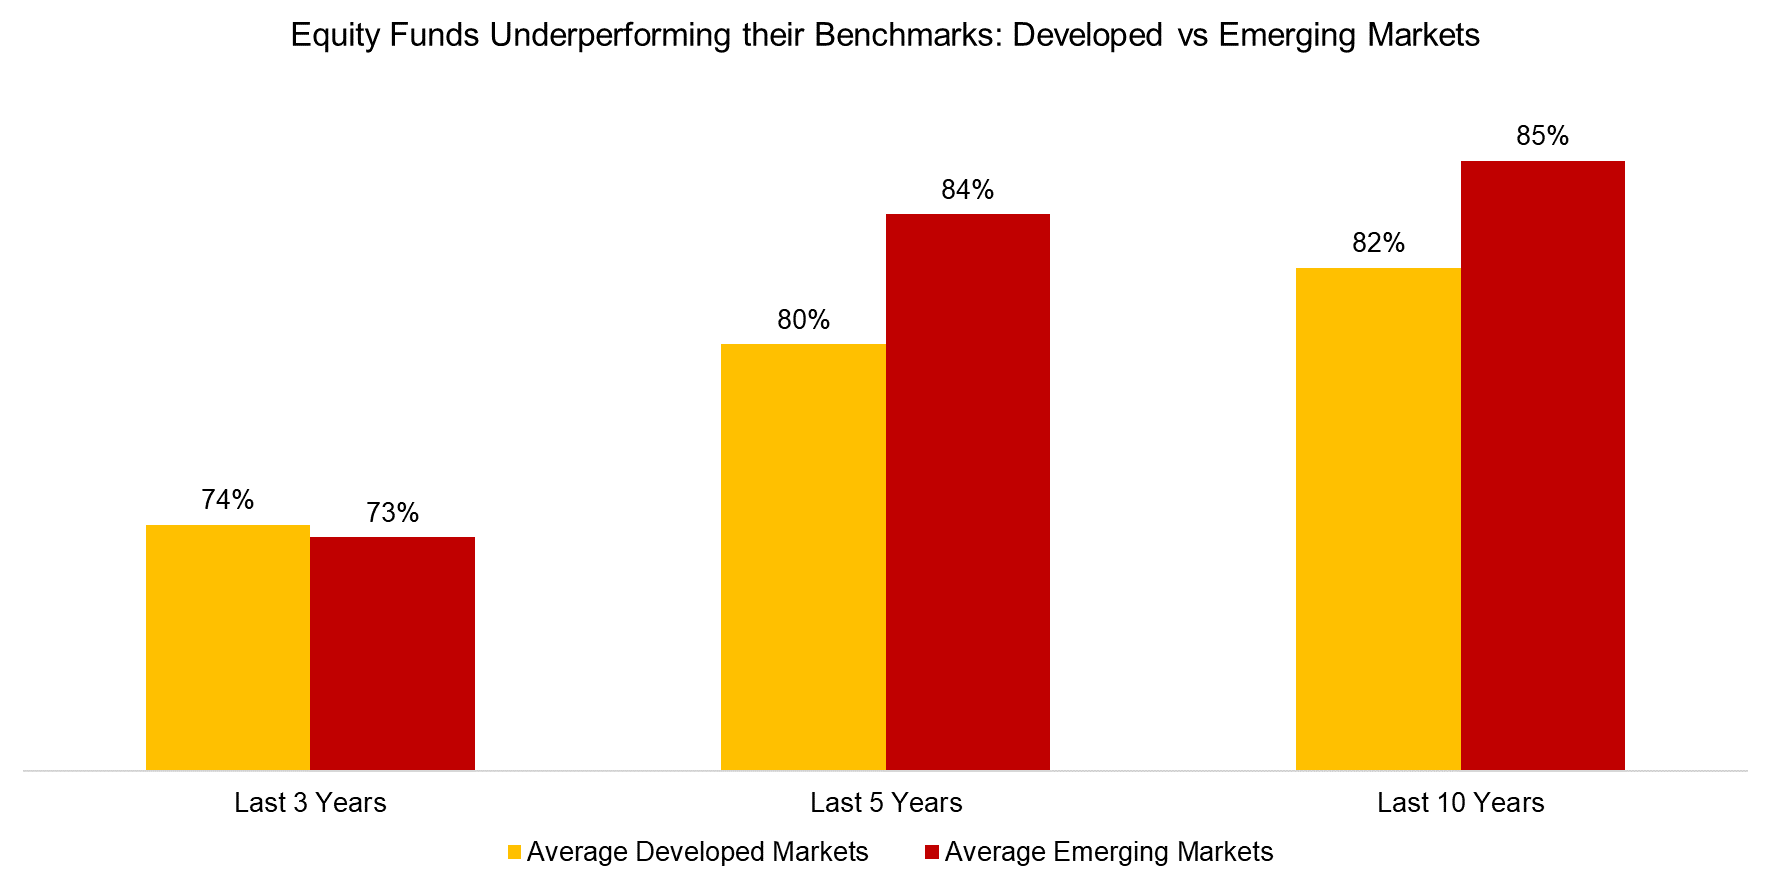 Equity Funds Underperforming their Benchmarks Developed vs Emerging Markets